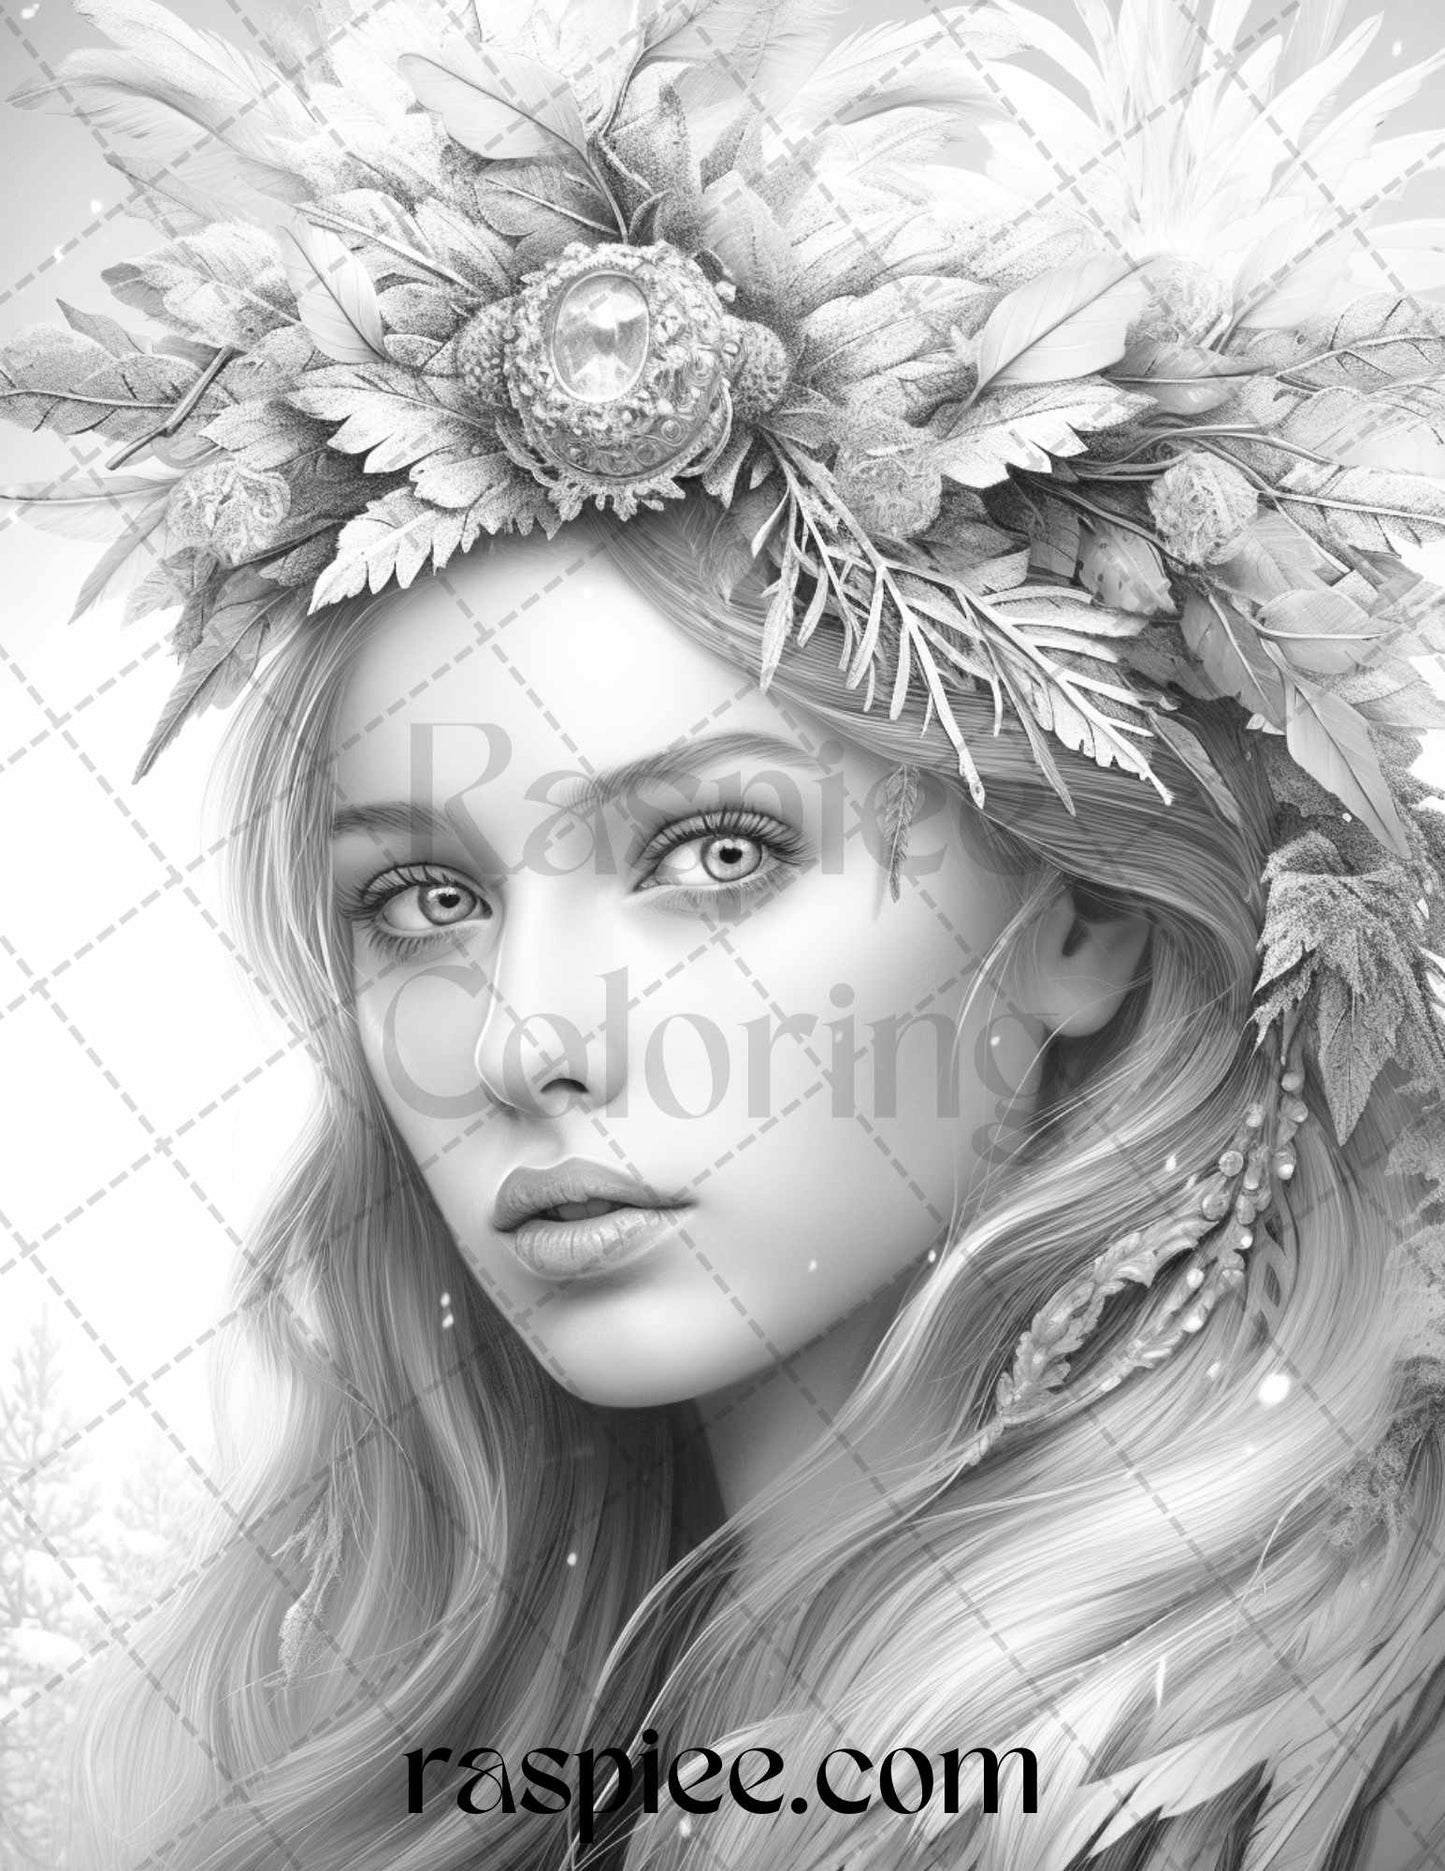 Grayscale Fairy Coloring Page, Winter Fairy Printable Illustration, Adult Coloring Book Art, Detailed Fairy Coloring Sheet, Digital Download Coloring Page, Stress Relief Coloring Activity, High-Quality Winter Fairy Art, Relaxation Coloring Sheets, Fairy and Winter Scenes, Christmas Coloring Pages, Xmas Coloring Pages